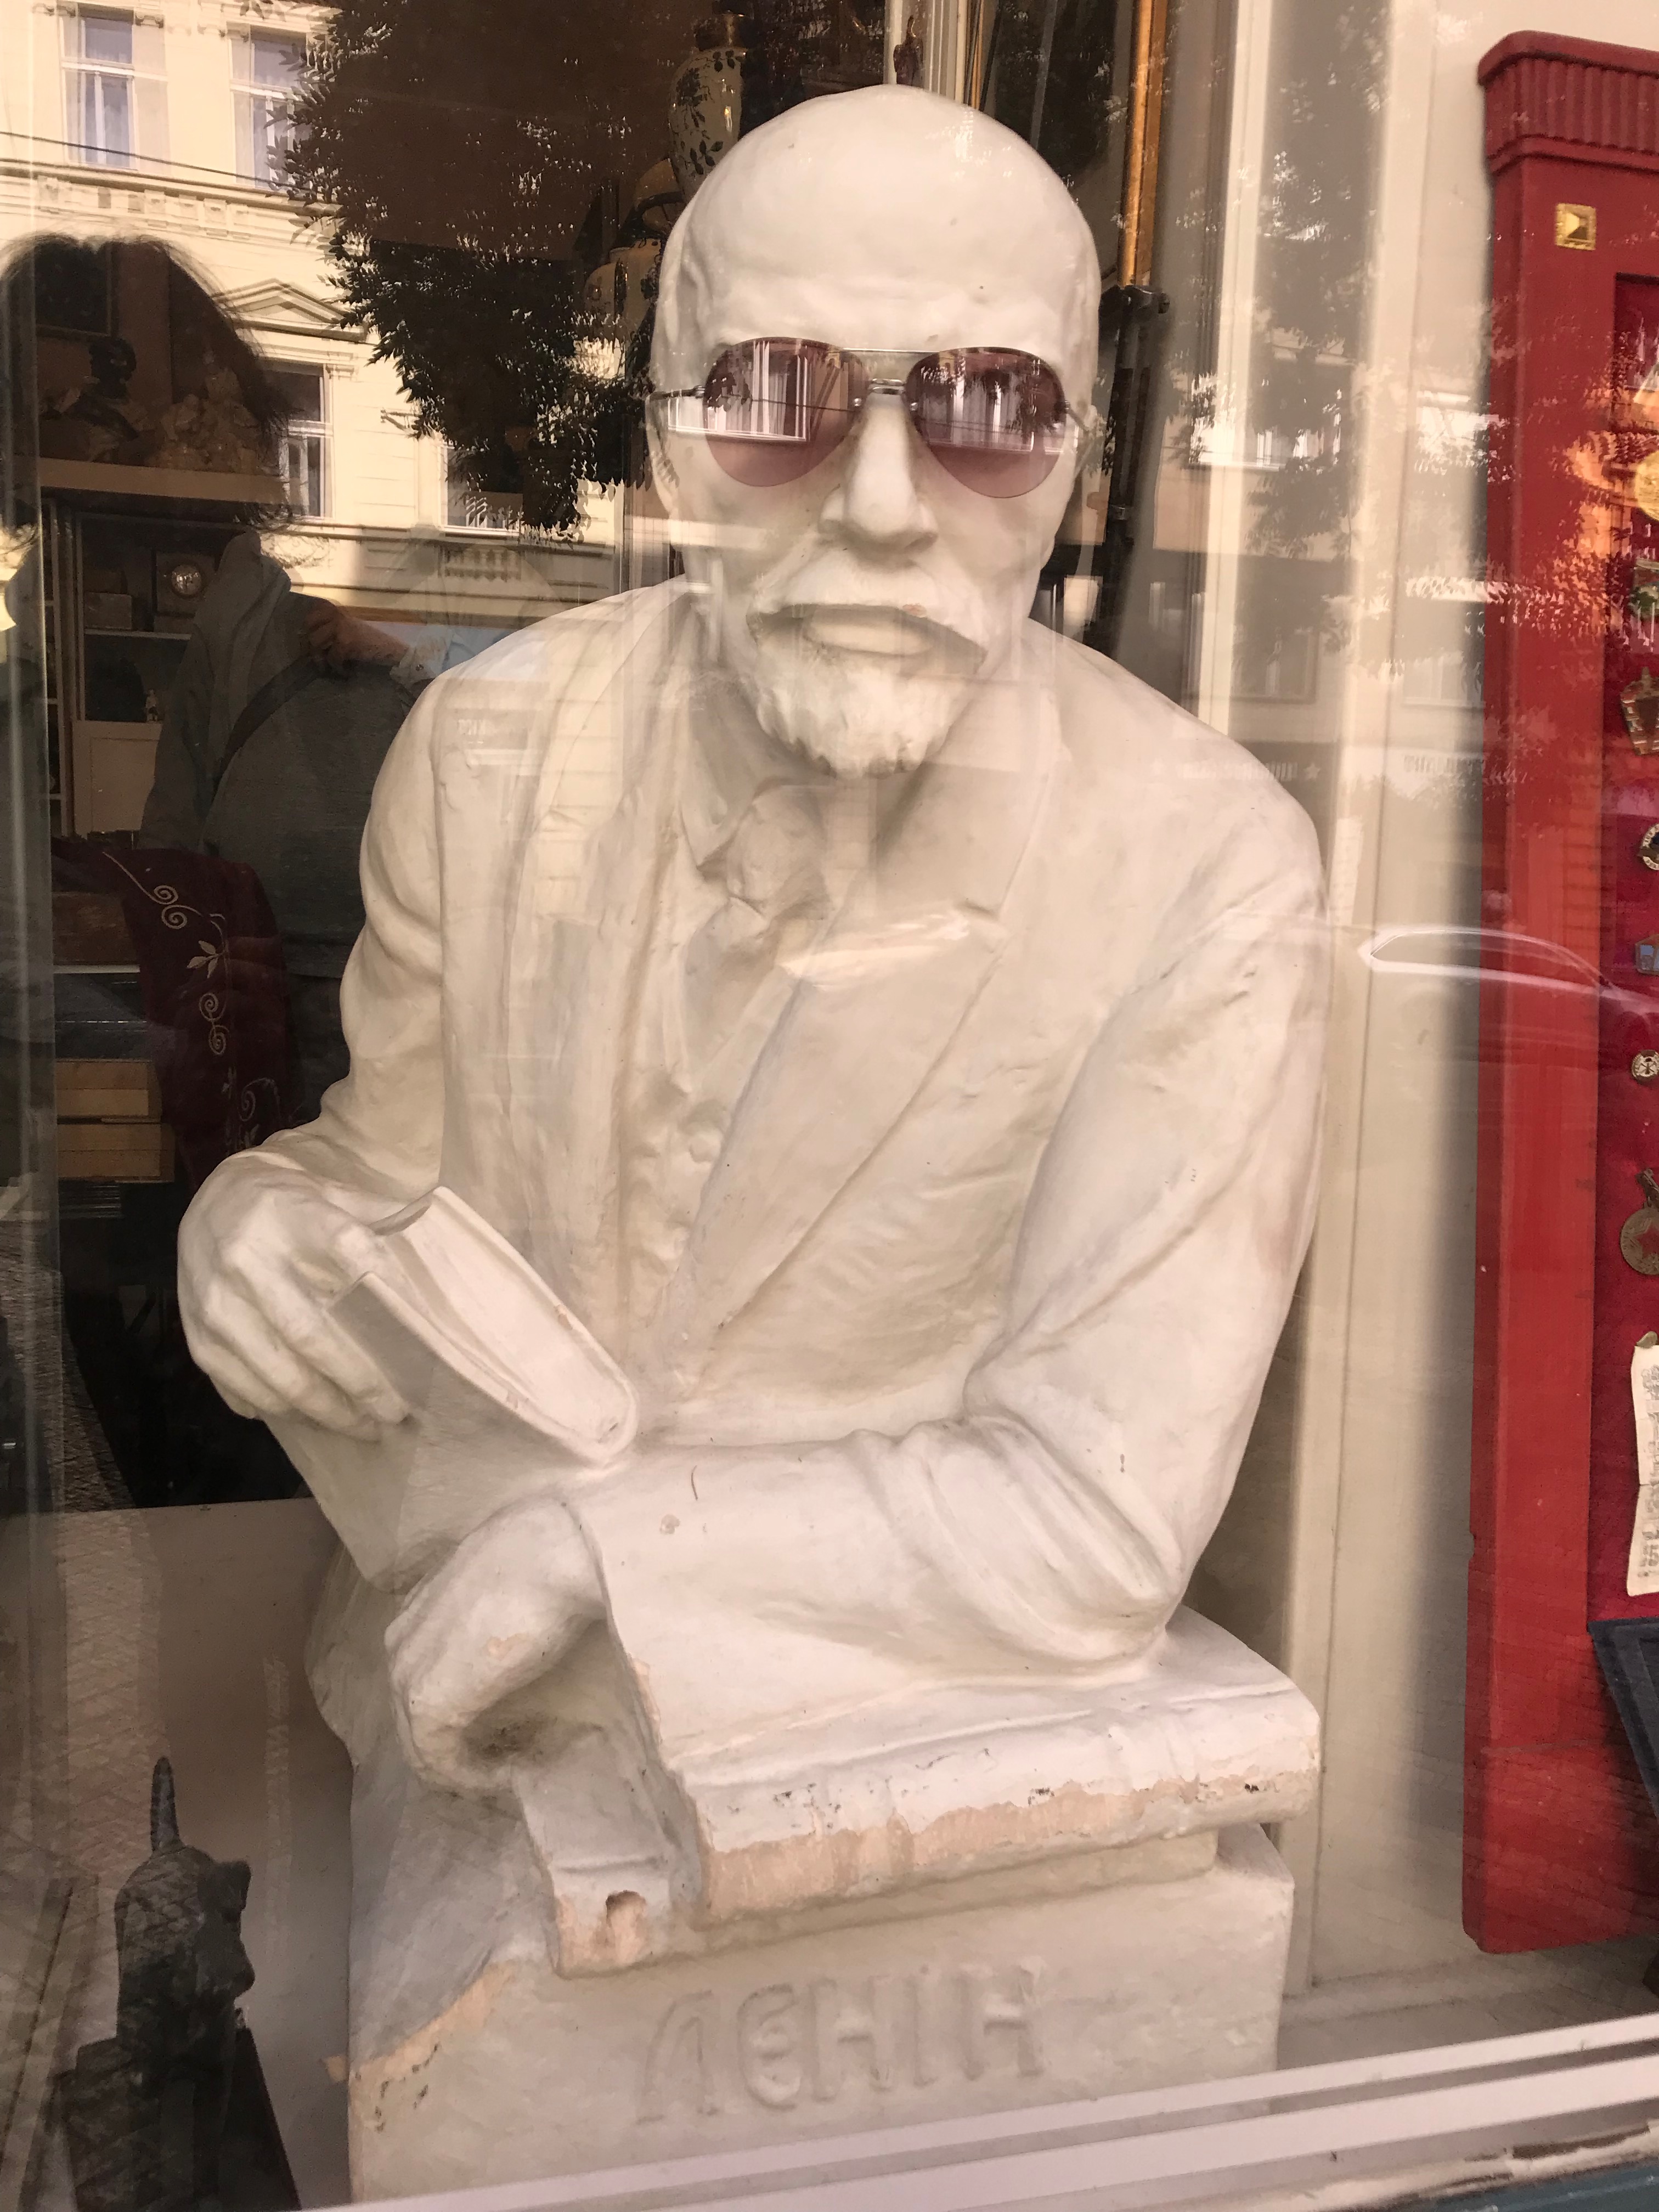 Image 8. Sculpture of Lenin wearing sunglasses staying in the window of  antique shop.